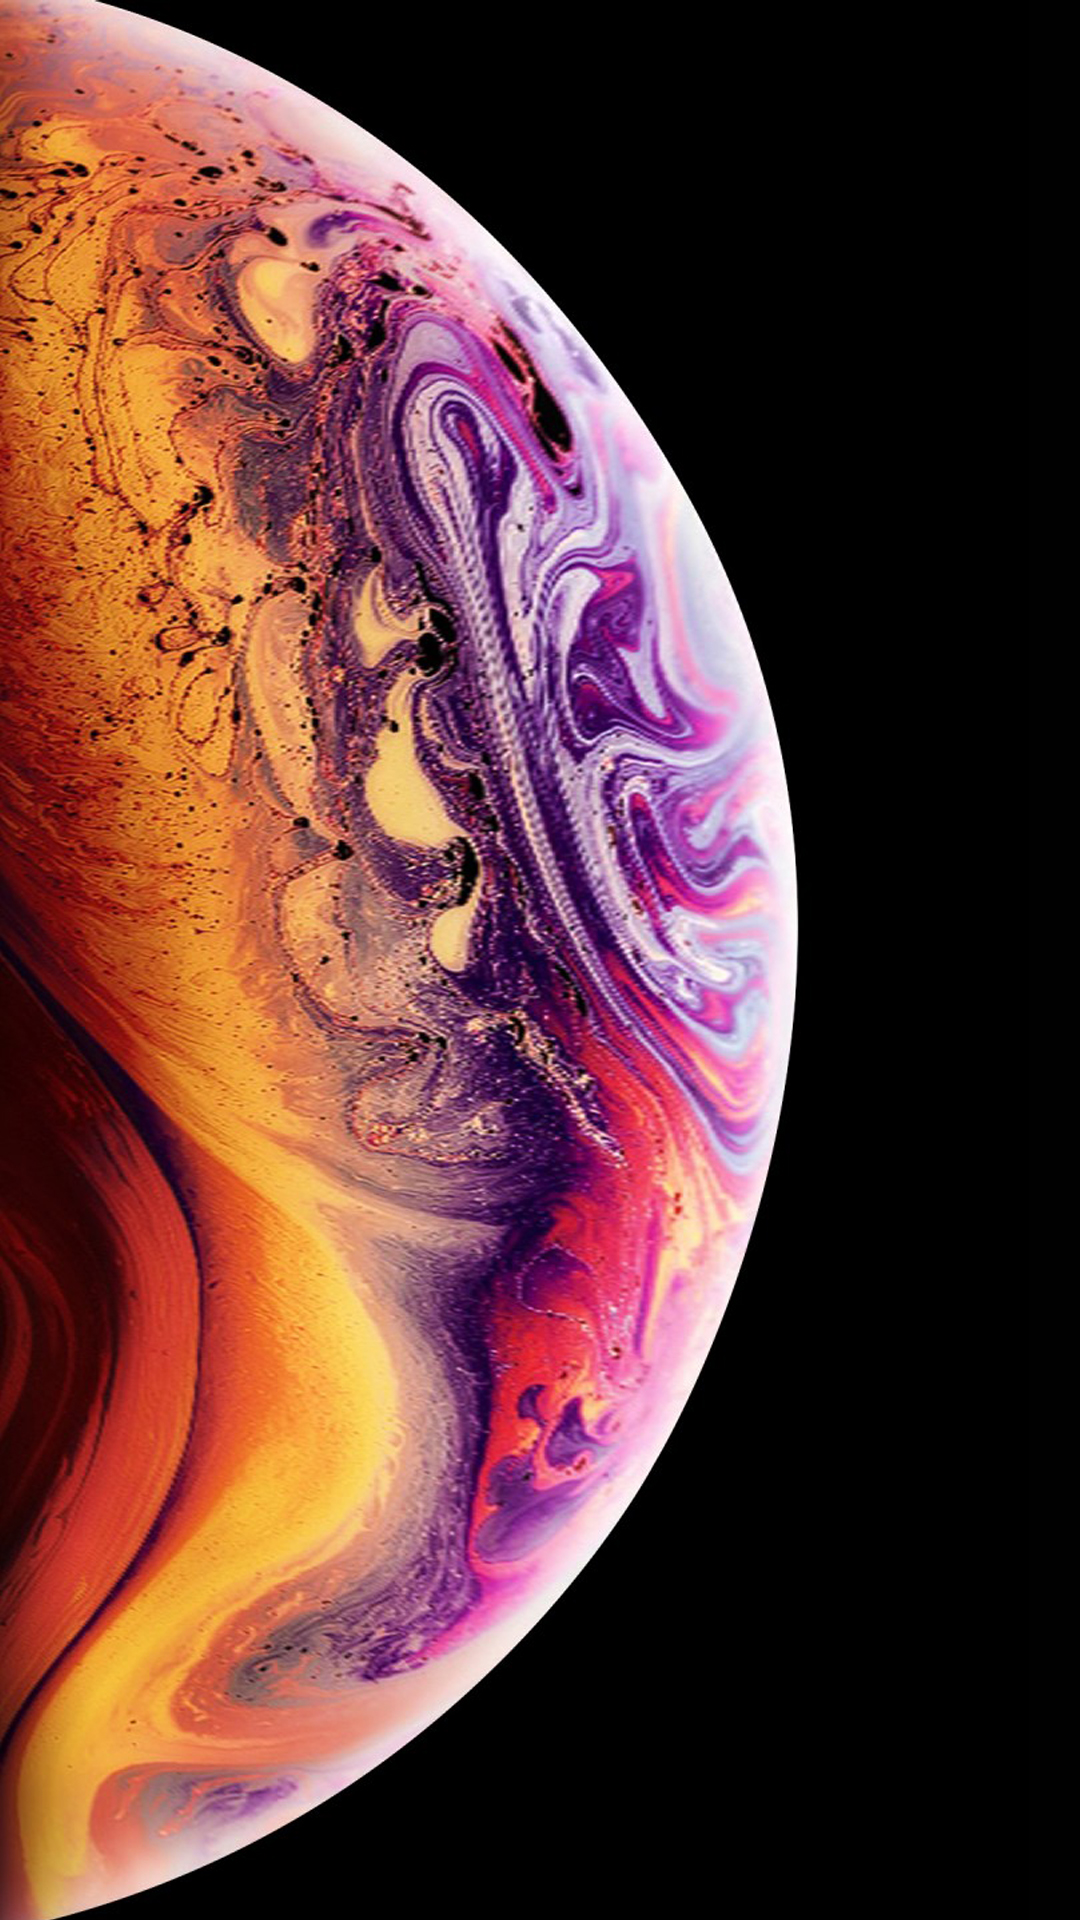 IPhone Xs Background - Download Mobile Phone full HD wallpaper